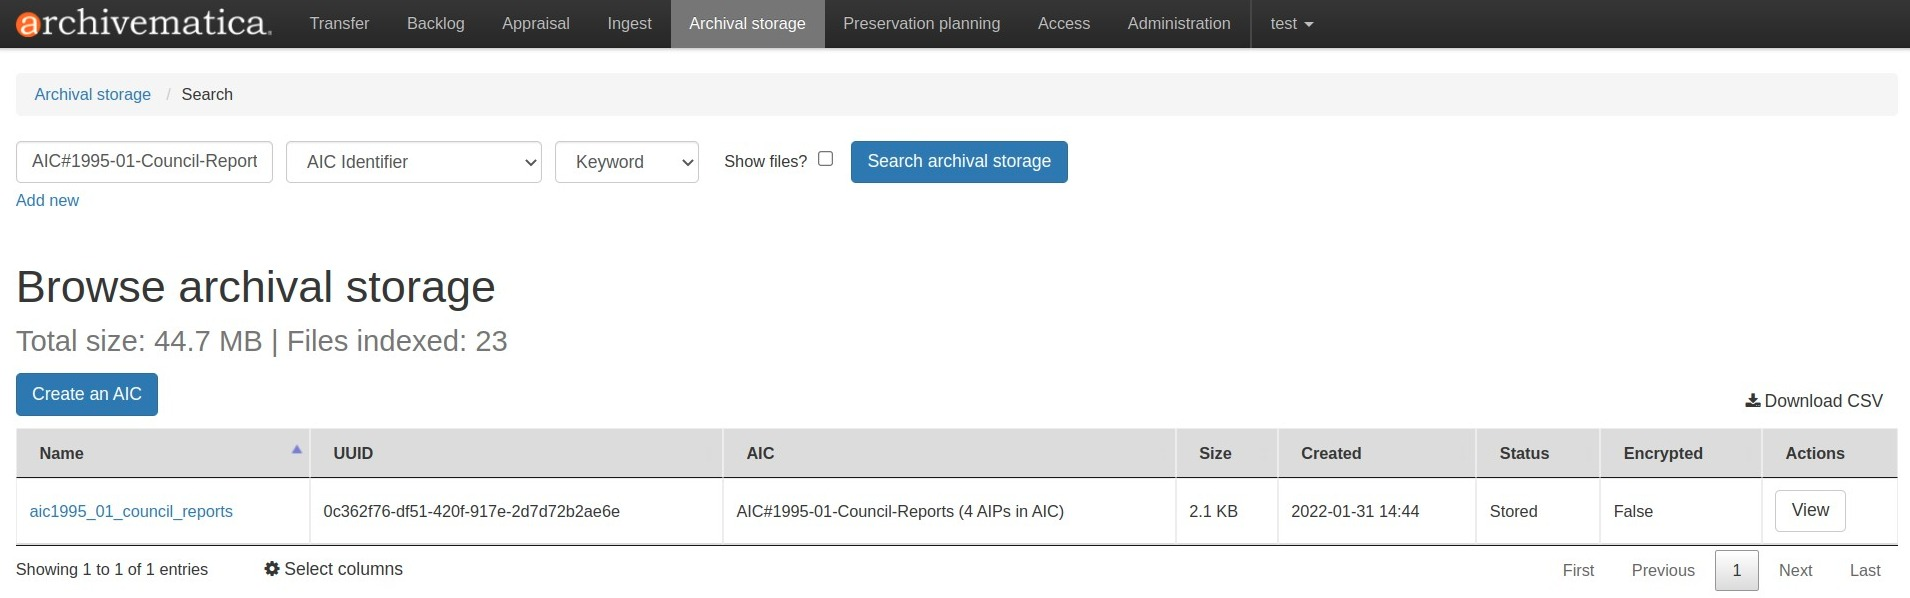 Search for AICs using the AIC identifier